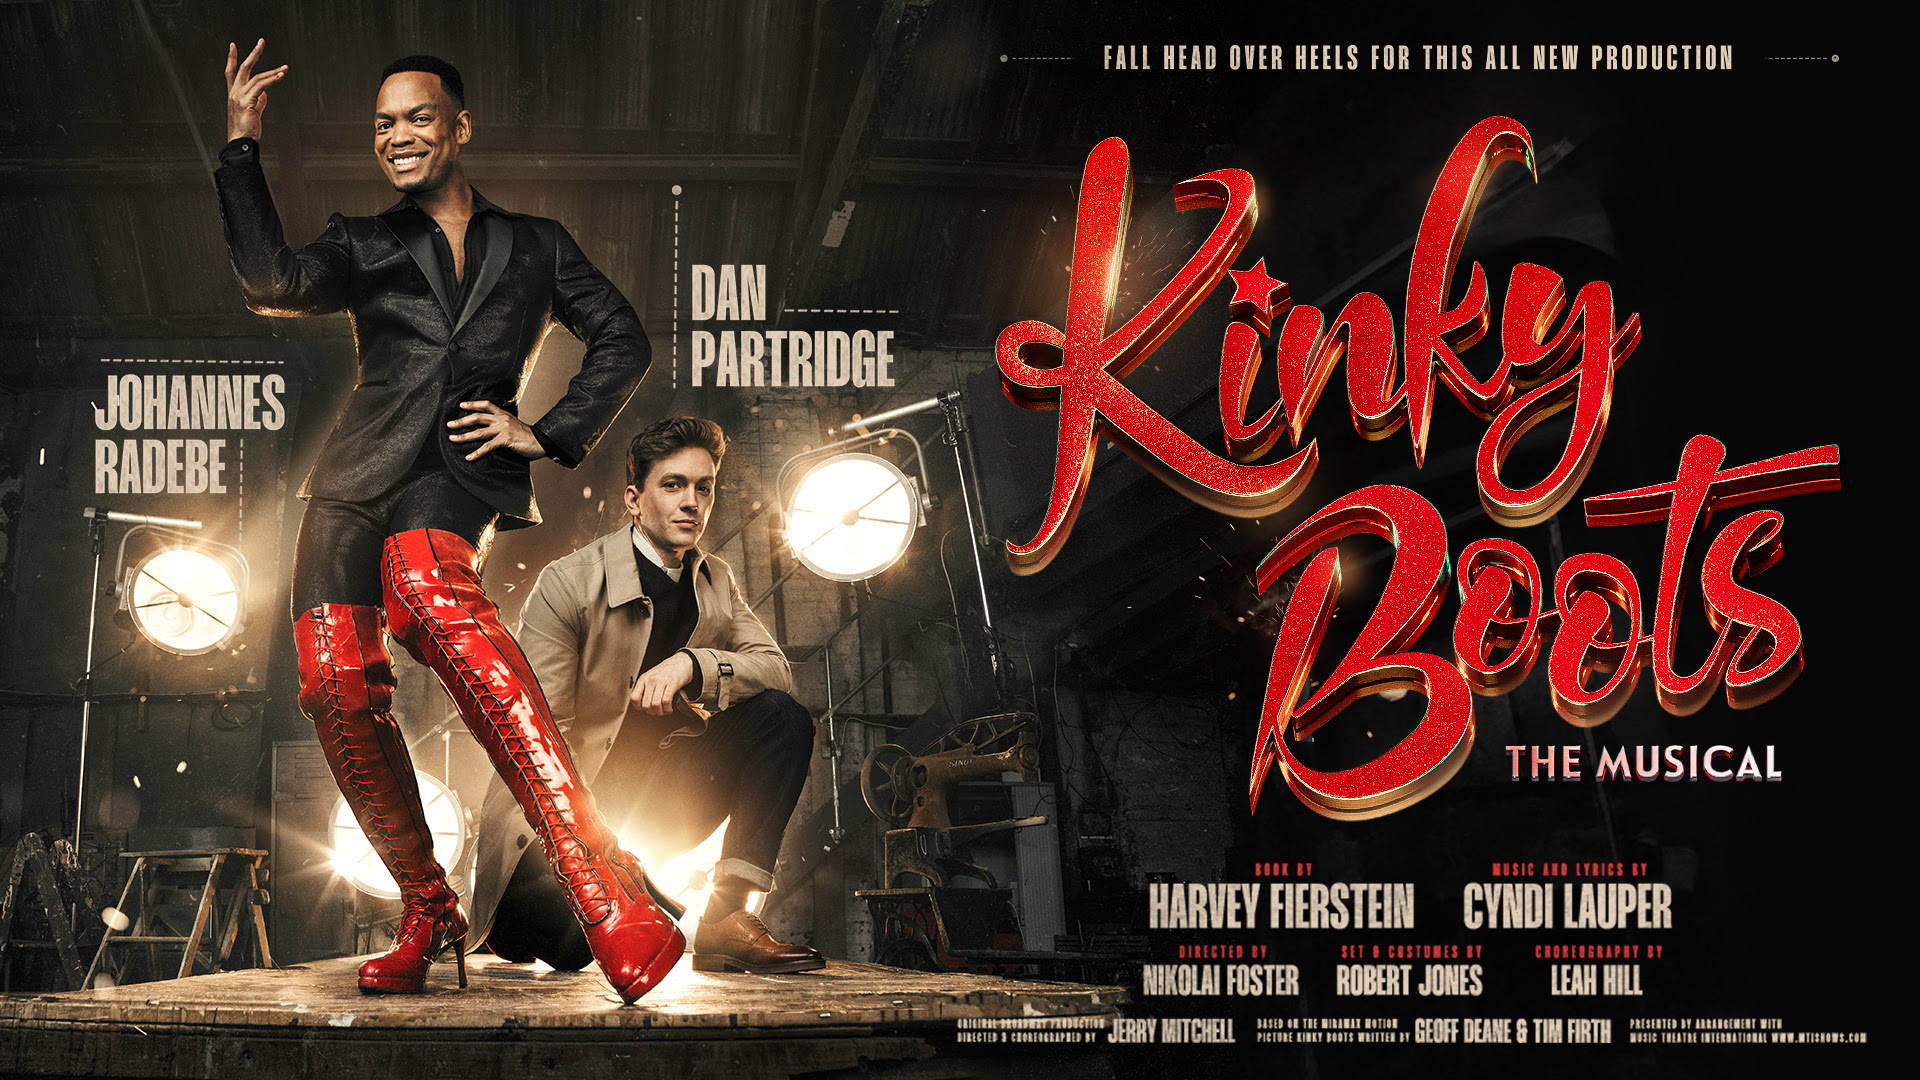 Tour of Kinky Boots the Musical with venue information and booking details